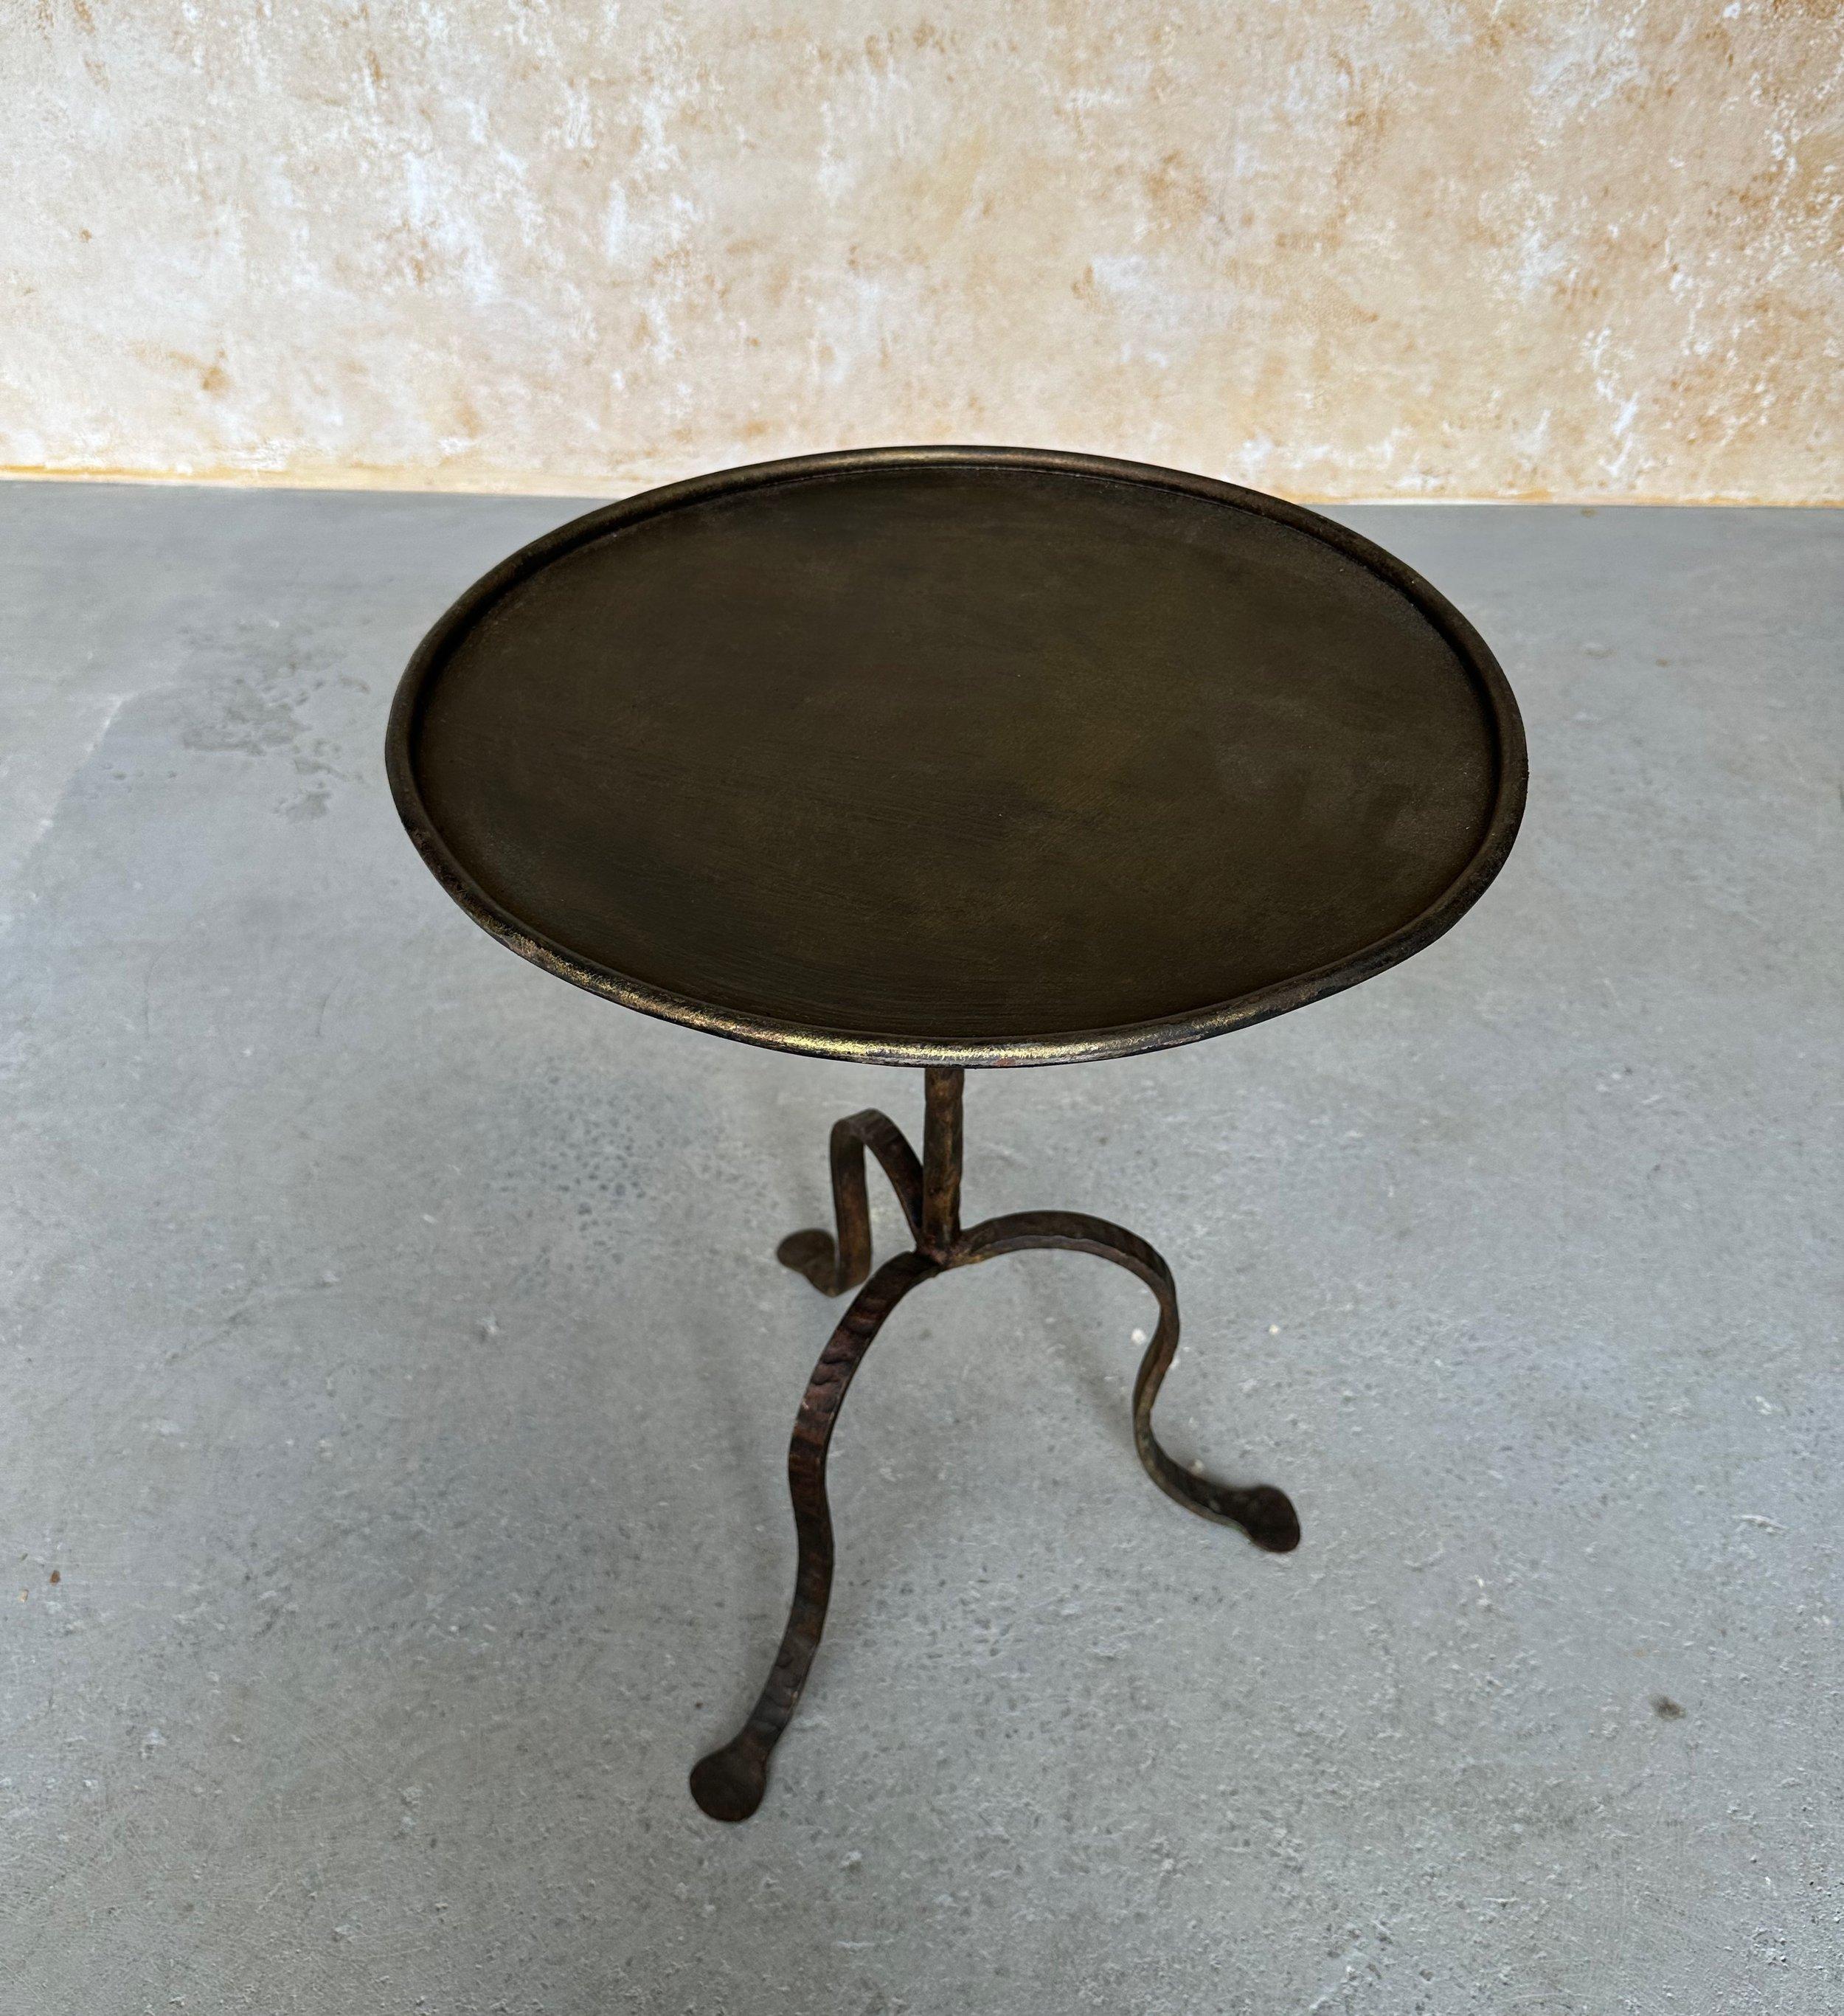 Vintage Spanish Iron Drinks Table with Curved Legs 1